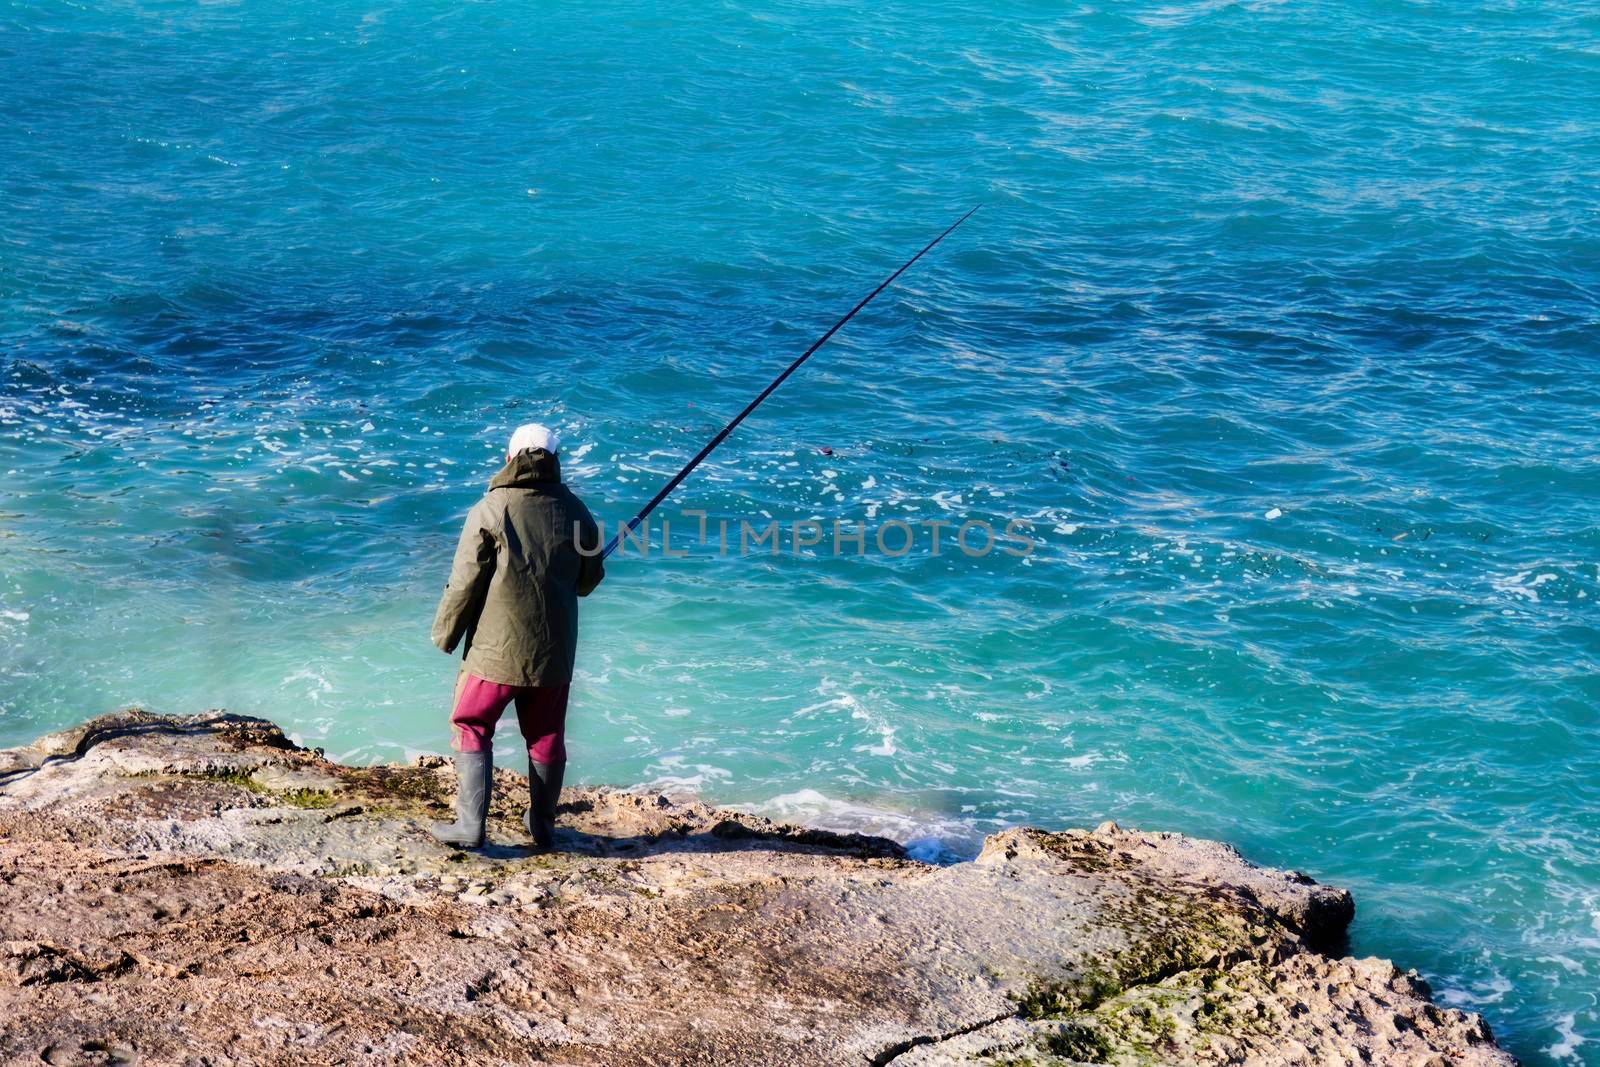 Fisherman stood on a rocky beach fishing with a rod in winter